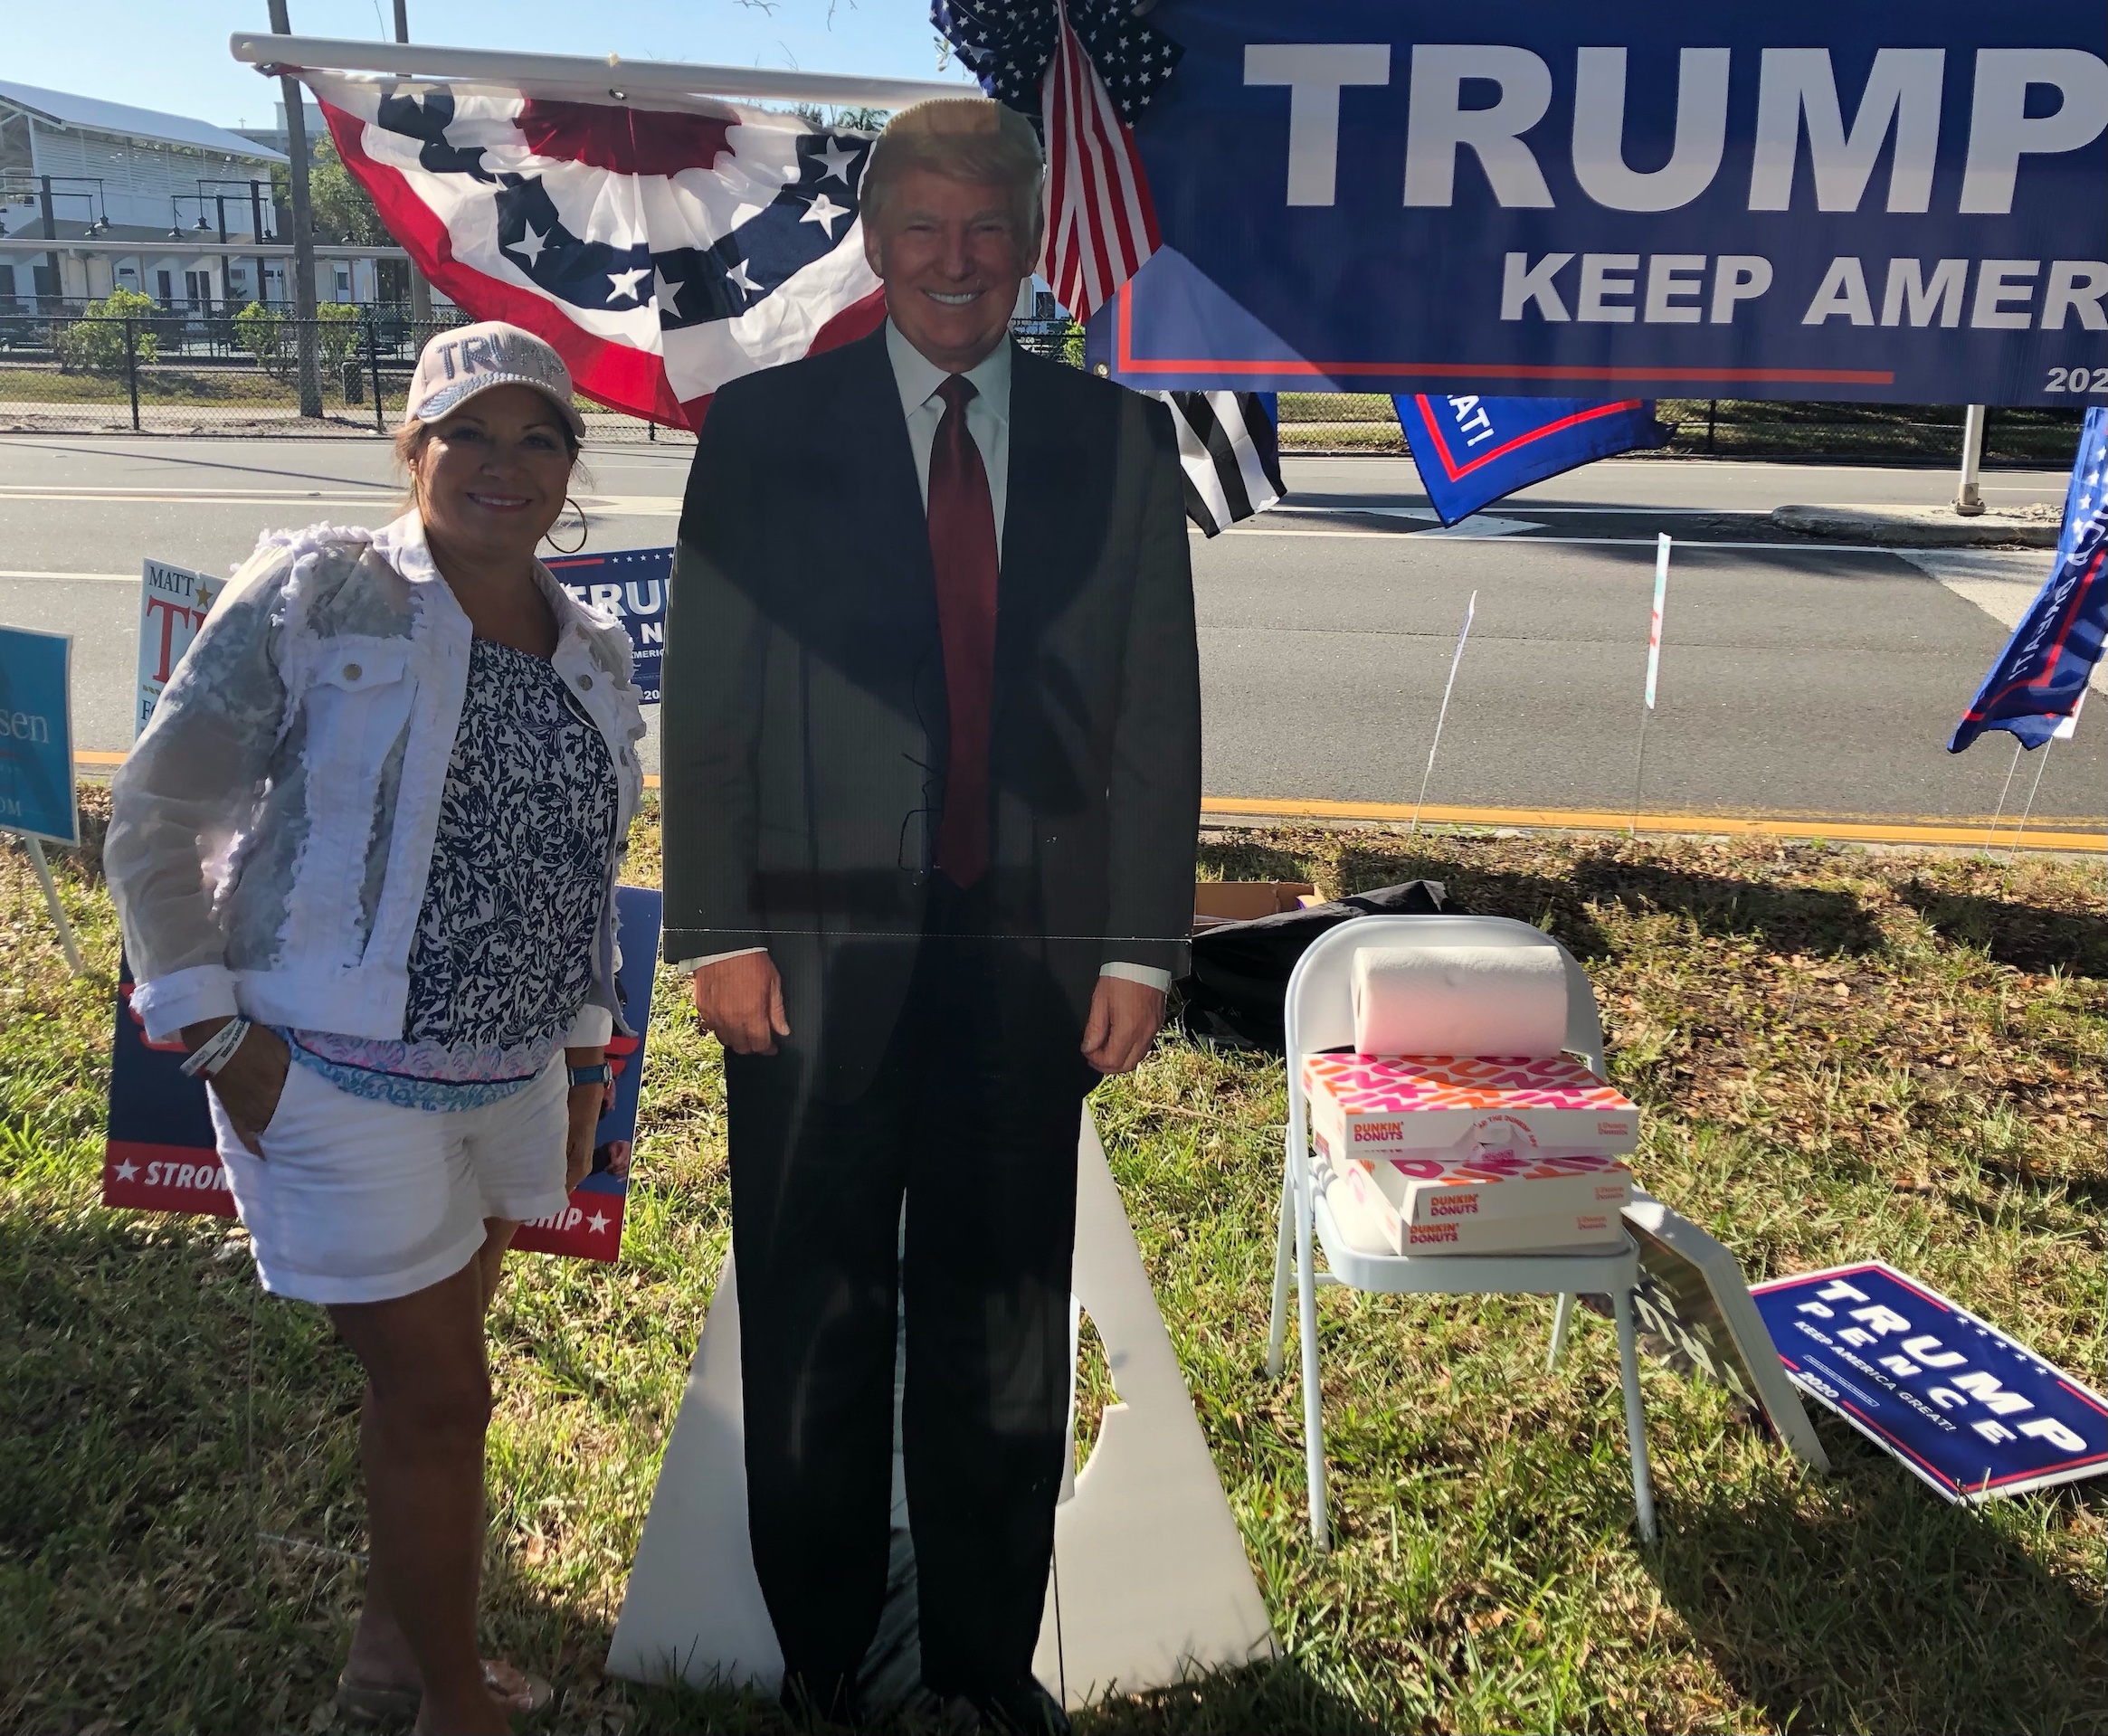 Melodie Stang, a real estate broker and an enthusiastice advocate for President Donald Trump, outside a St Petersburg, Fl voting site on 3 November (MEE/Sheren Khalel)